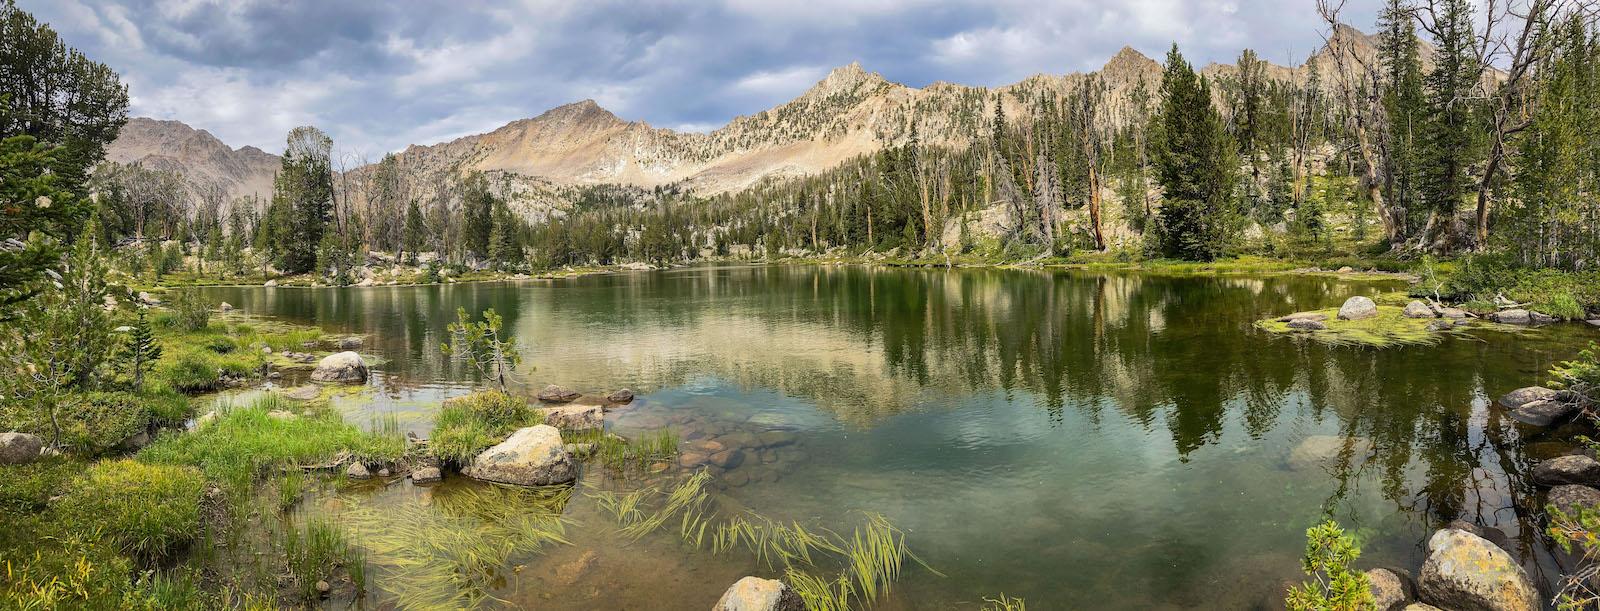 Hourglass Lake in the Boulder Chain Lakes Basin along the White Clouds Loop in Idaho